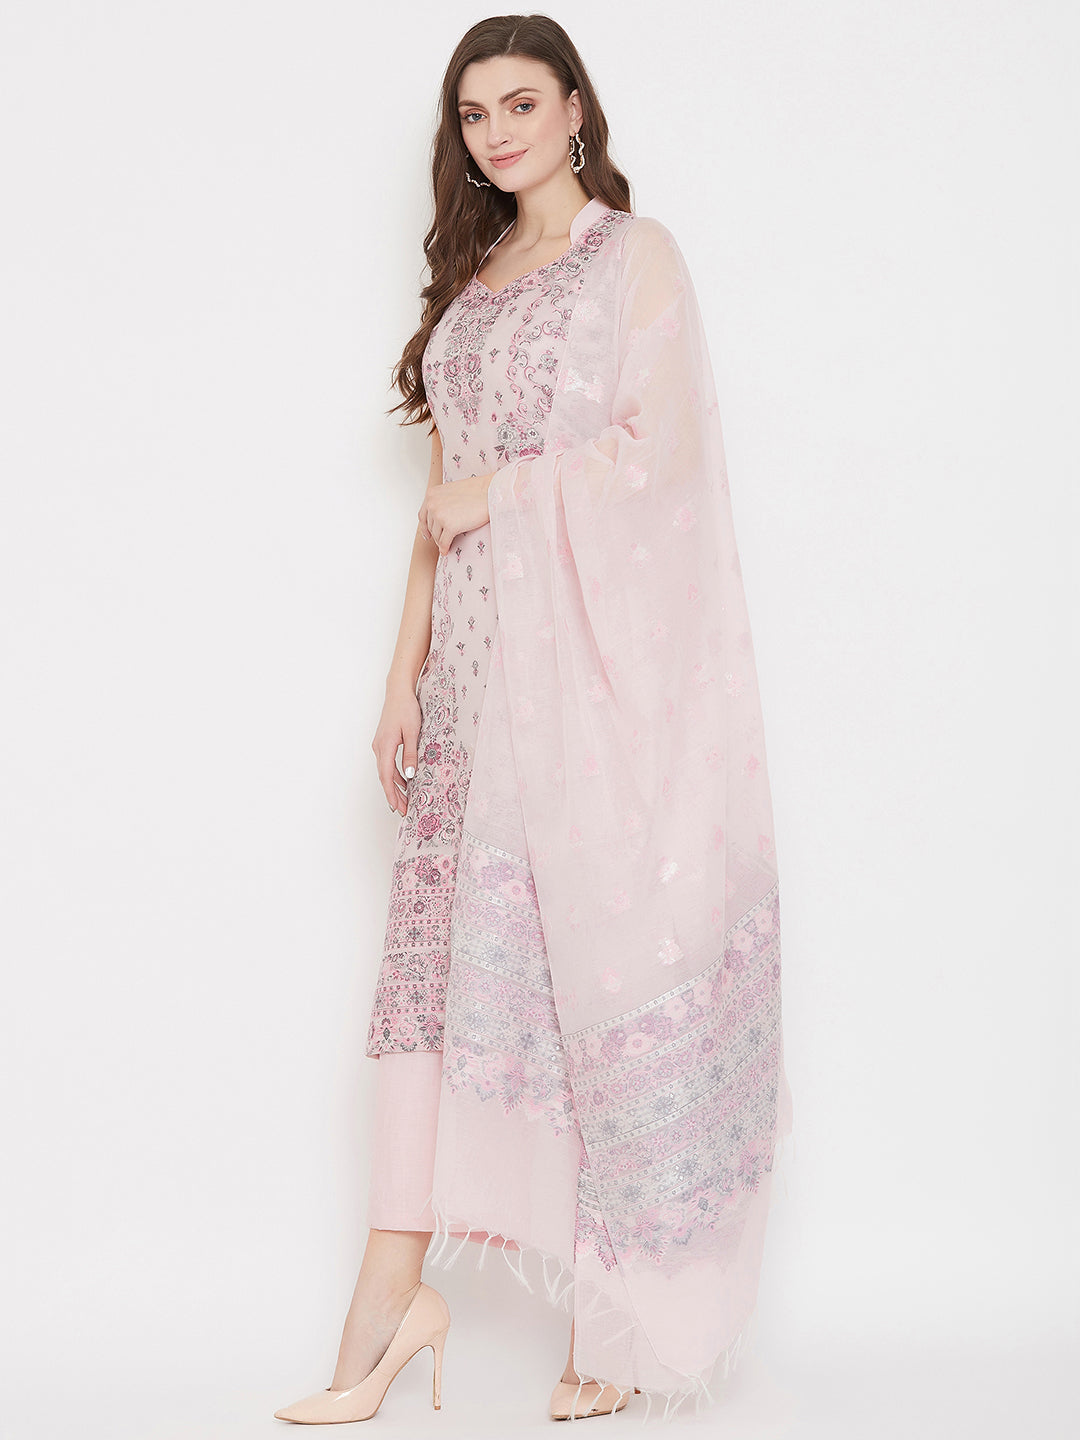 ORGANIC COTTON WOVEN PINK DRESS MATERIAL WITH DUPATTA